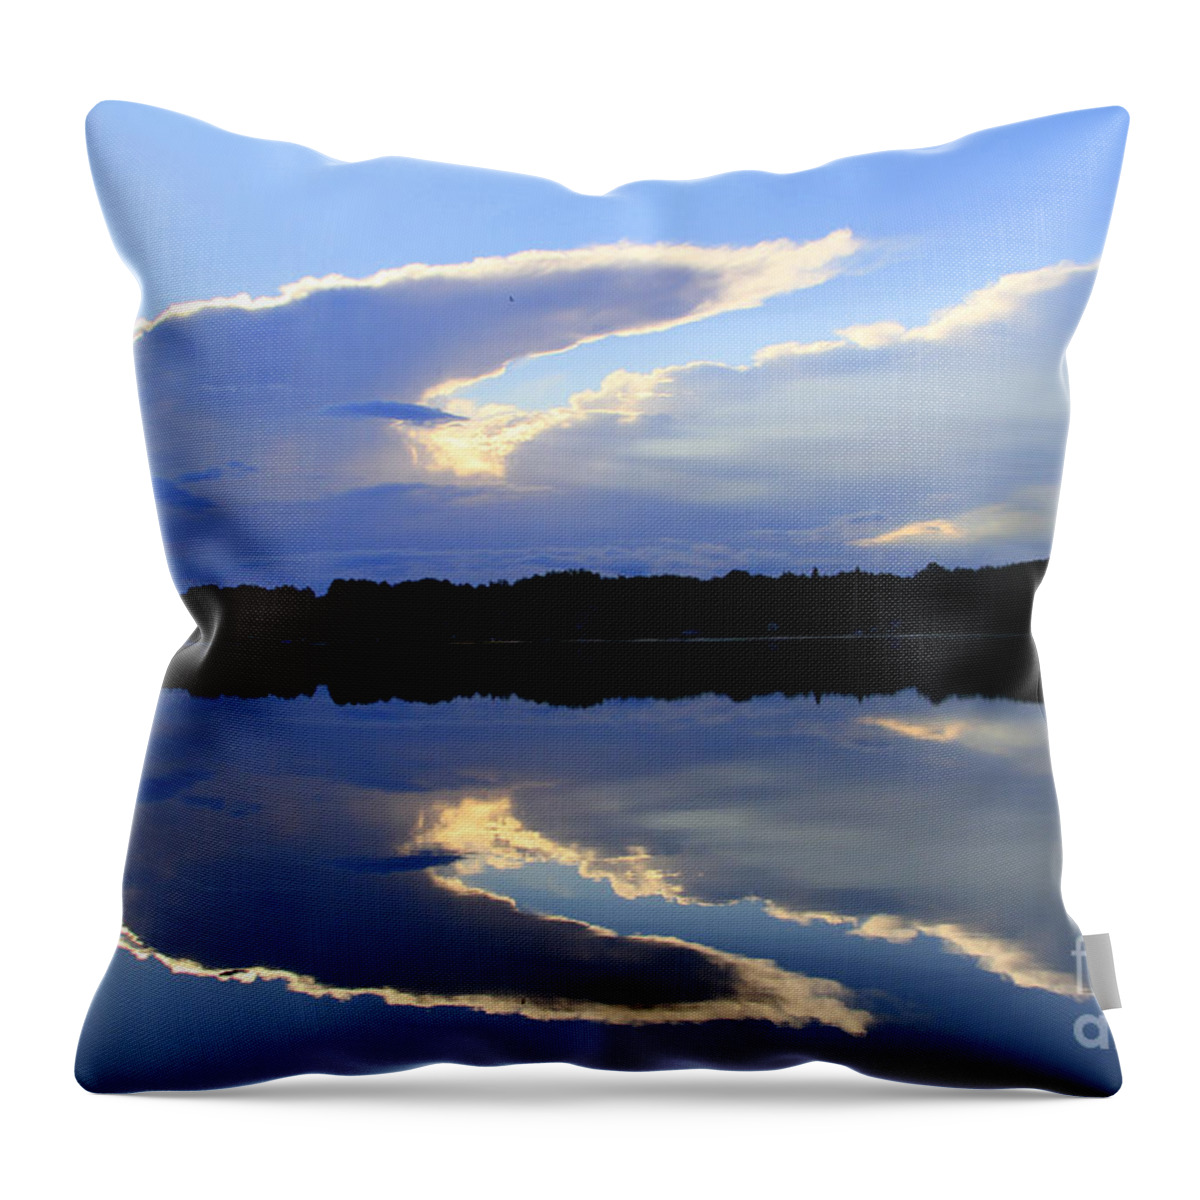 Sunset Throw Pillow featuring the photograph Rorschach reflection by Rick Rauzi